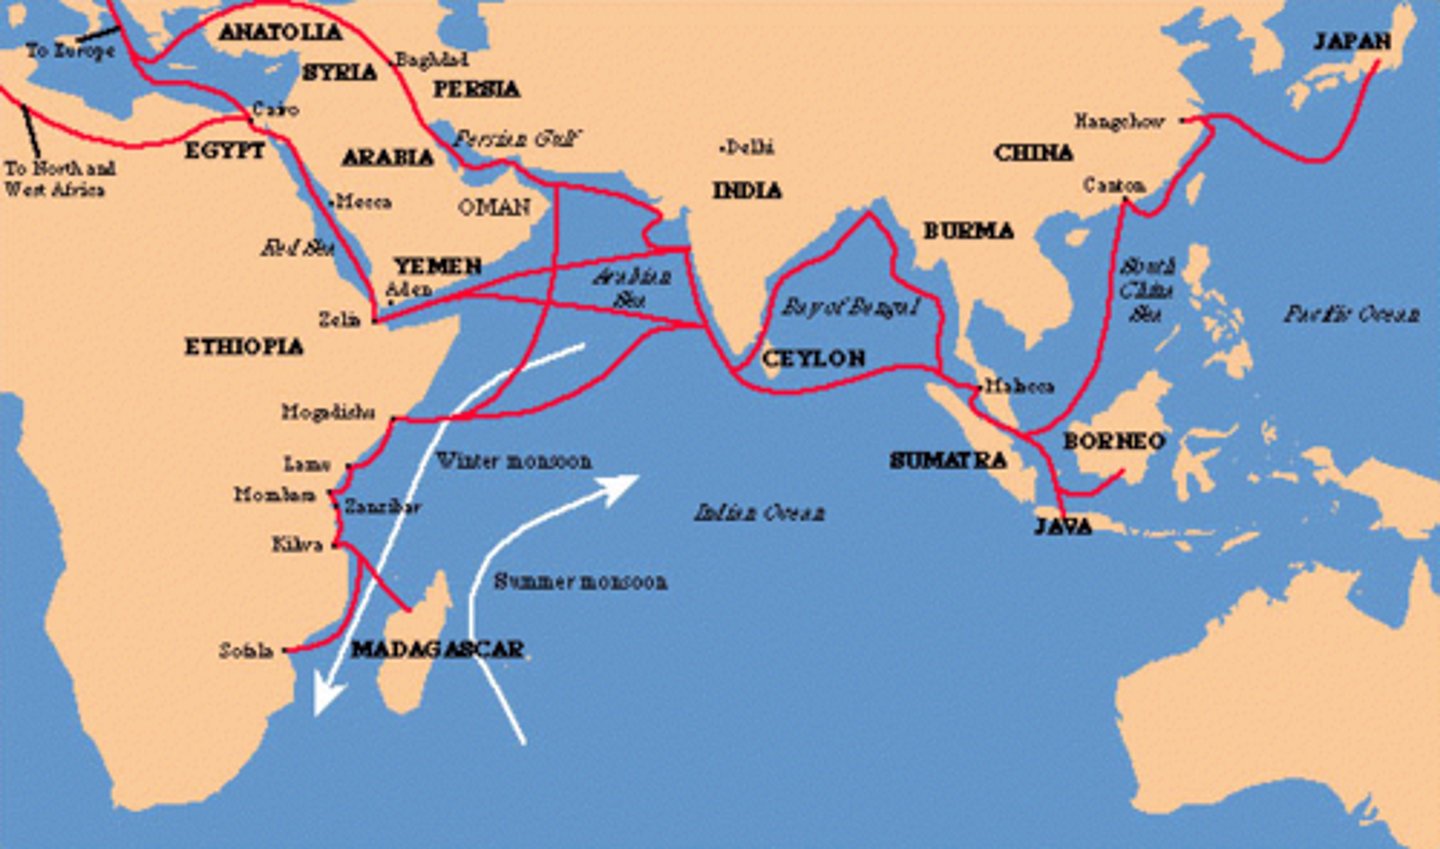 <p>"The Asian trading network was composed of three main zones: an Indian zone, an Arab zone and a Chinese zone. The Arab zone was based on tapestry, glass and carpentry. The Indian zone was focused on the trade of cotton and textiles. The Chinese zone primarily traded porcelain, silks and paper. The merchants who initiated the trade carried their culture to the different geographic regions. As a result, foreign languages, customs, religions, beliefs, technology and art emerged in Asia. Asian culture also spread to other regions through this trade network. The Asian sea trading network also included the Japan, the Southeast Asian islands, as well as parts of East Africa. Arab, Chinese, Southeast Asian, and Indian traders sailed and traded to provide for their own livelihood and also to make profits for the merchants and princes who funded their expeditions."</p>